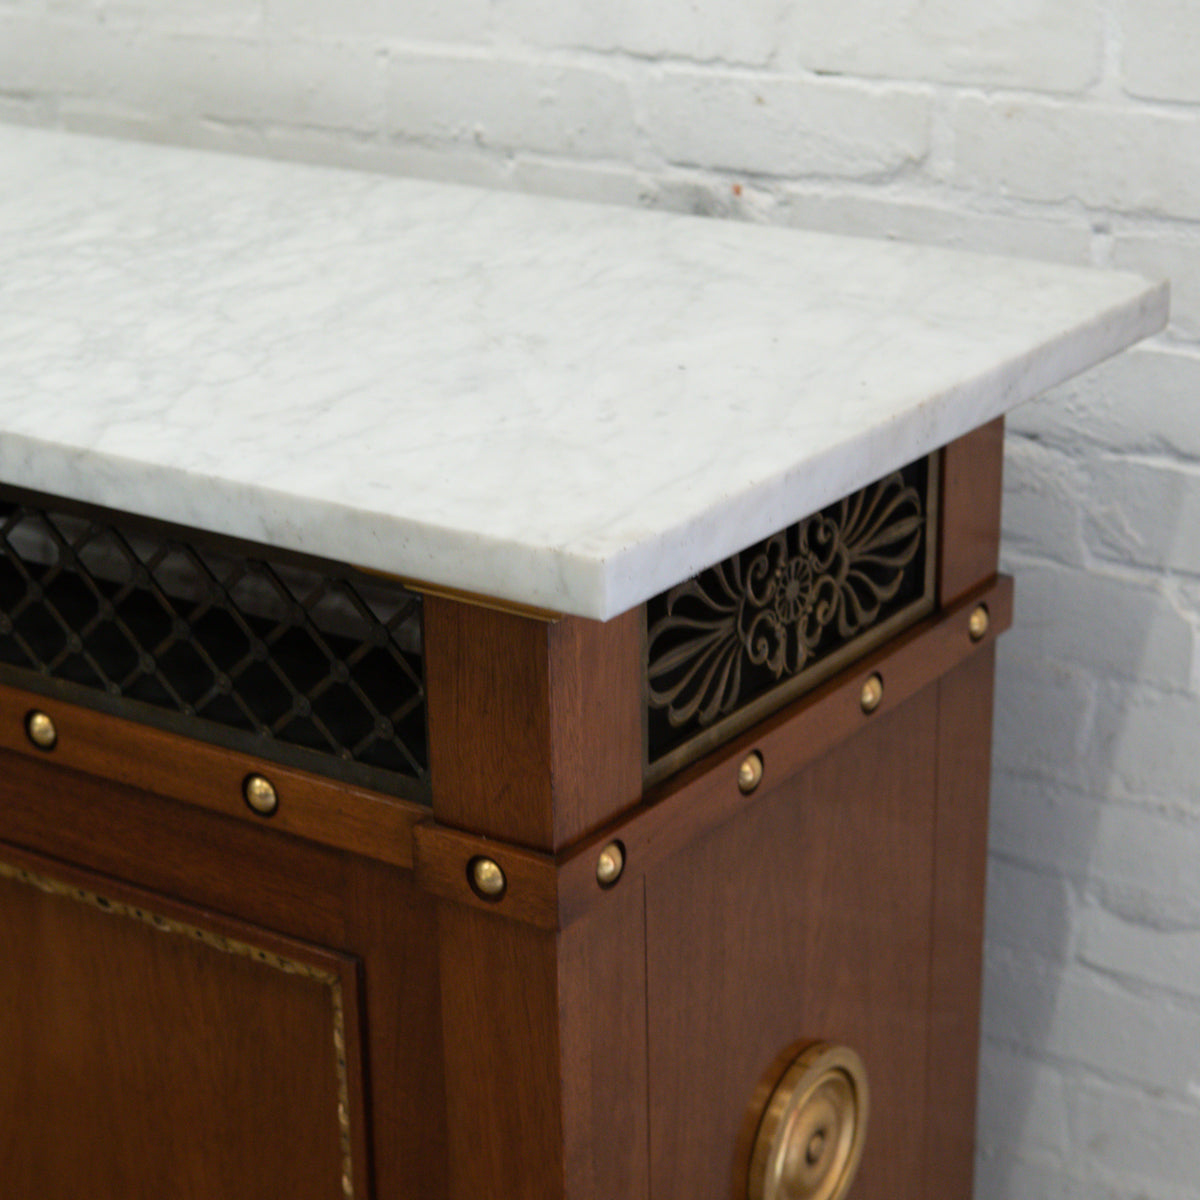 Console Table with Marble Top | Air Conditioning Unit Cover | The Architectural Forum